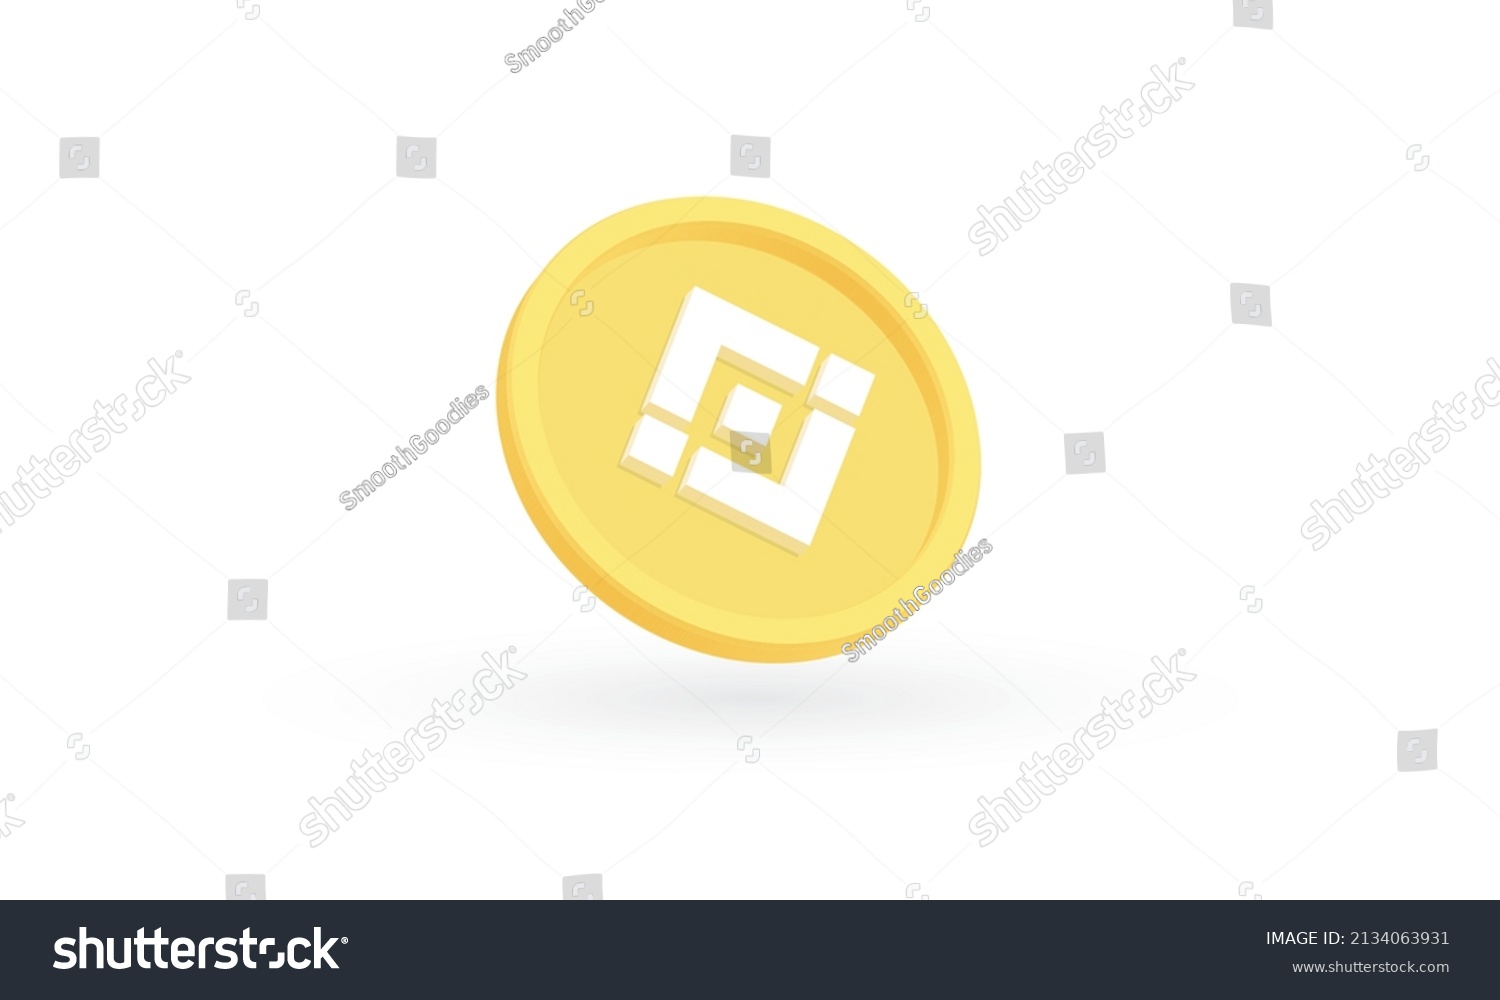 SVG of Gold Binance coin cryptocurrency on white background, BNB coin, Digital payment system blockchain svg